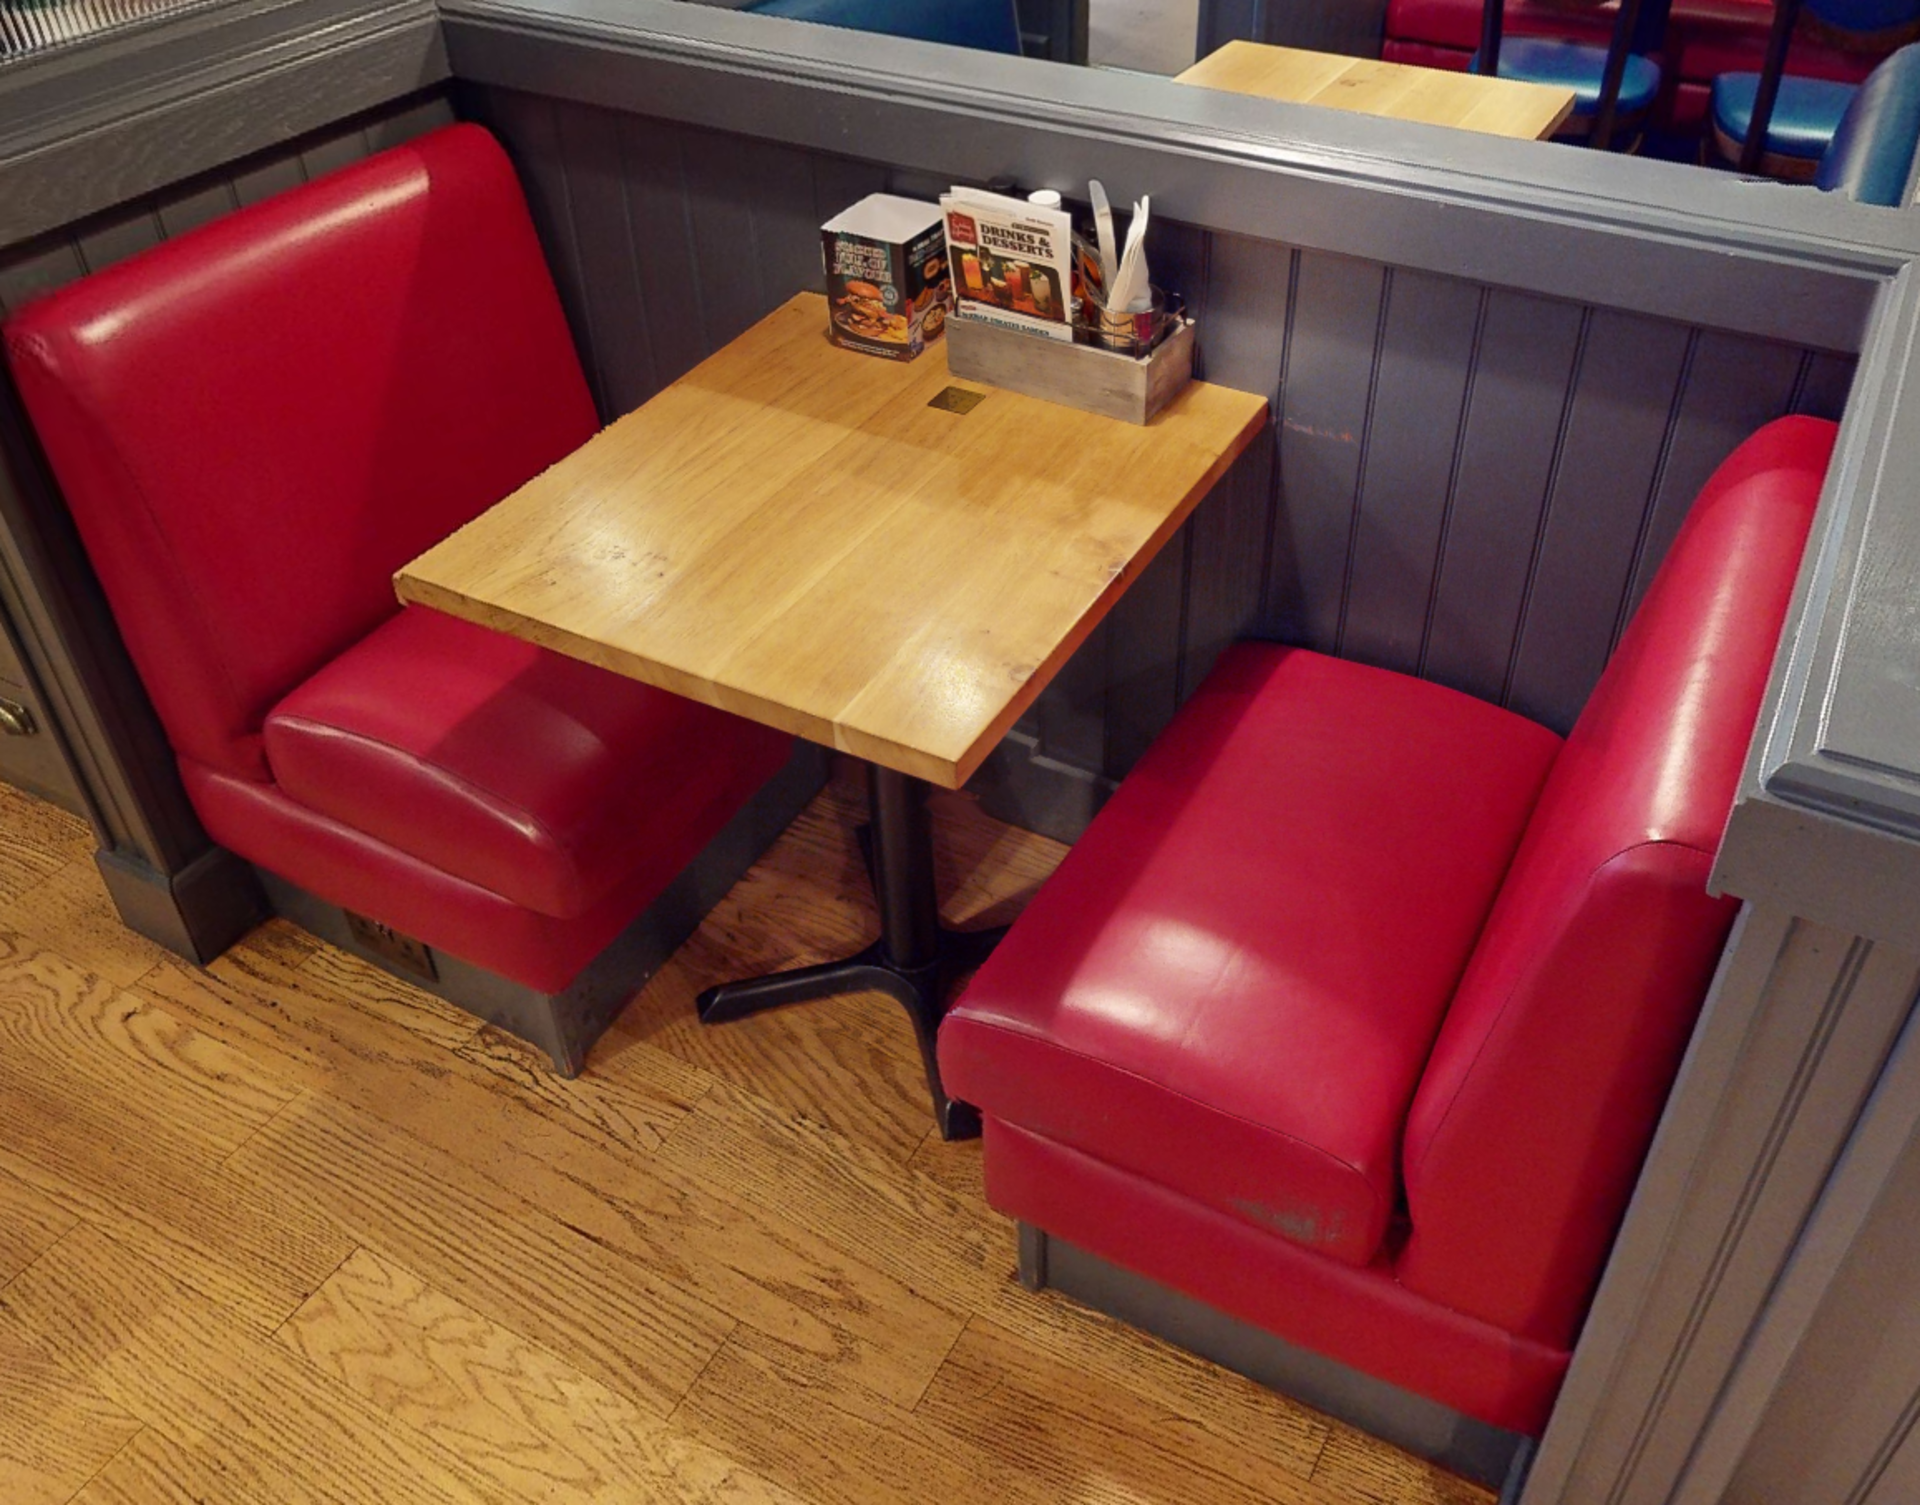 1 x Collection of Restaurant Seating Benches - Single Seat Benches in Red Faux Leather - Image 2 of 2